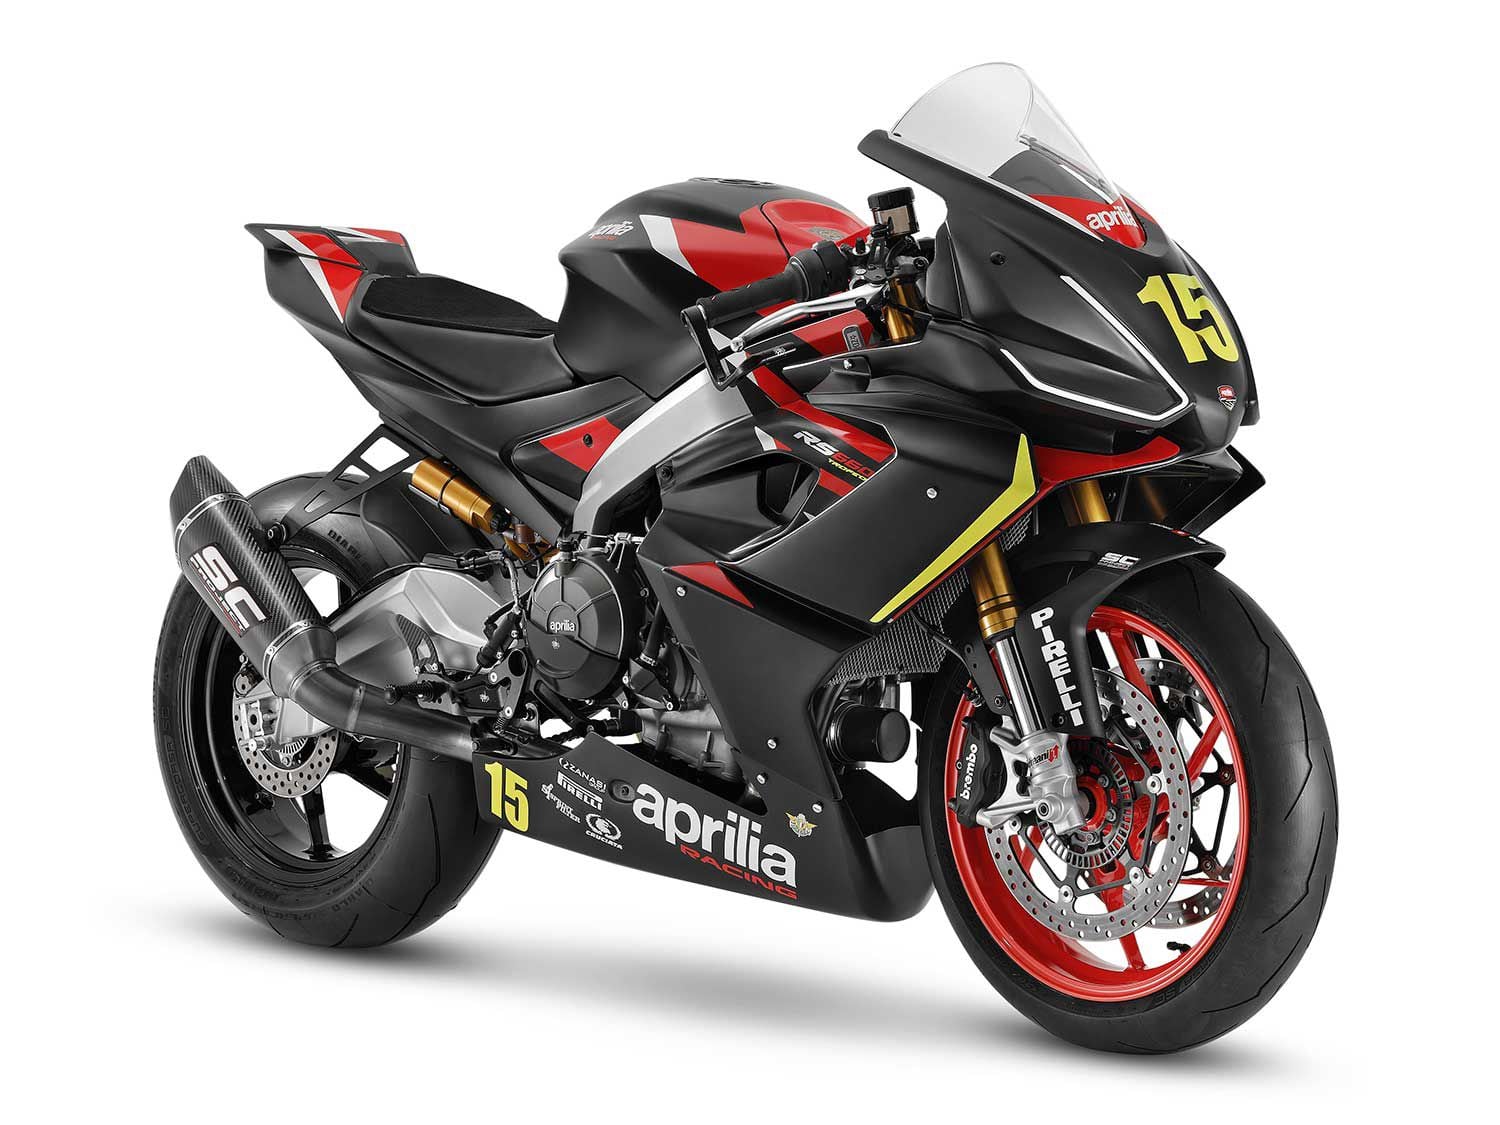 The 2021 Aprilia RS 660 Trofeo is Aprilia’s clever way of moving some units by showing what the street-focused RS 660 can do when let loose on a racetrack. The series format encourages participation by up-and-comers in the sport, and for a lucky few will be an all-inclusive pass to show off their talents.